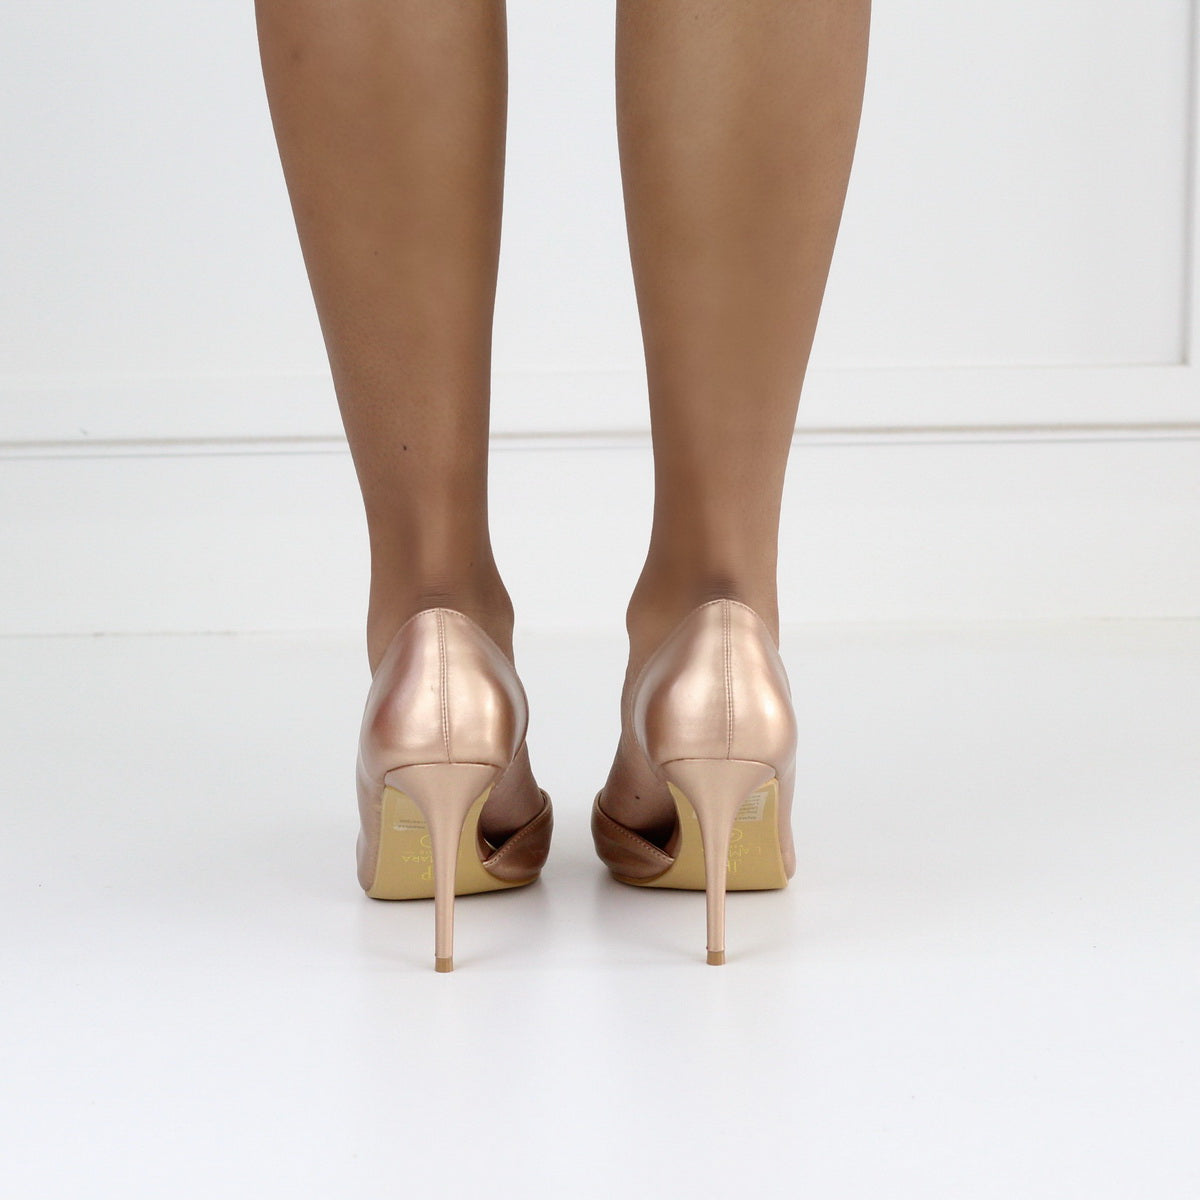 Rose gold 9cm heel open side court shoe with a gold trim daniella